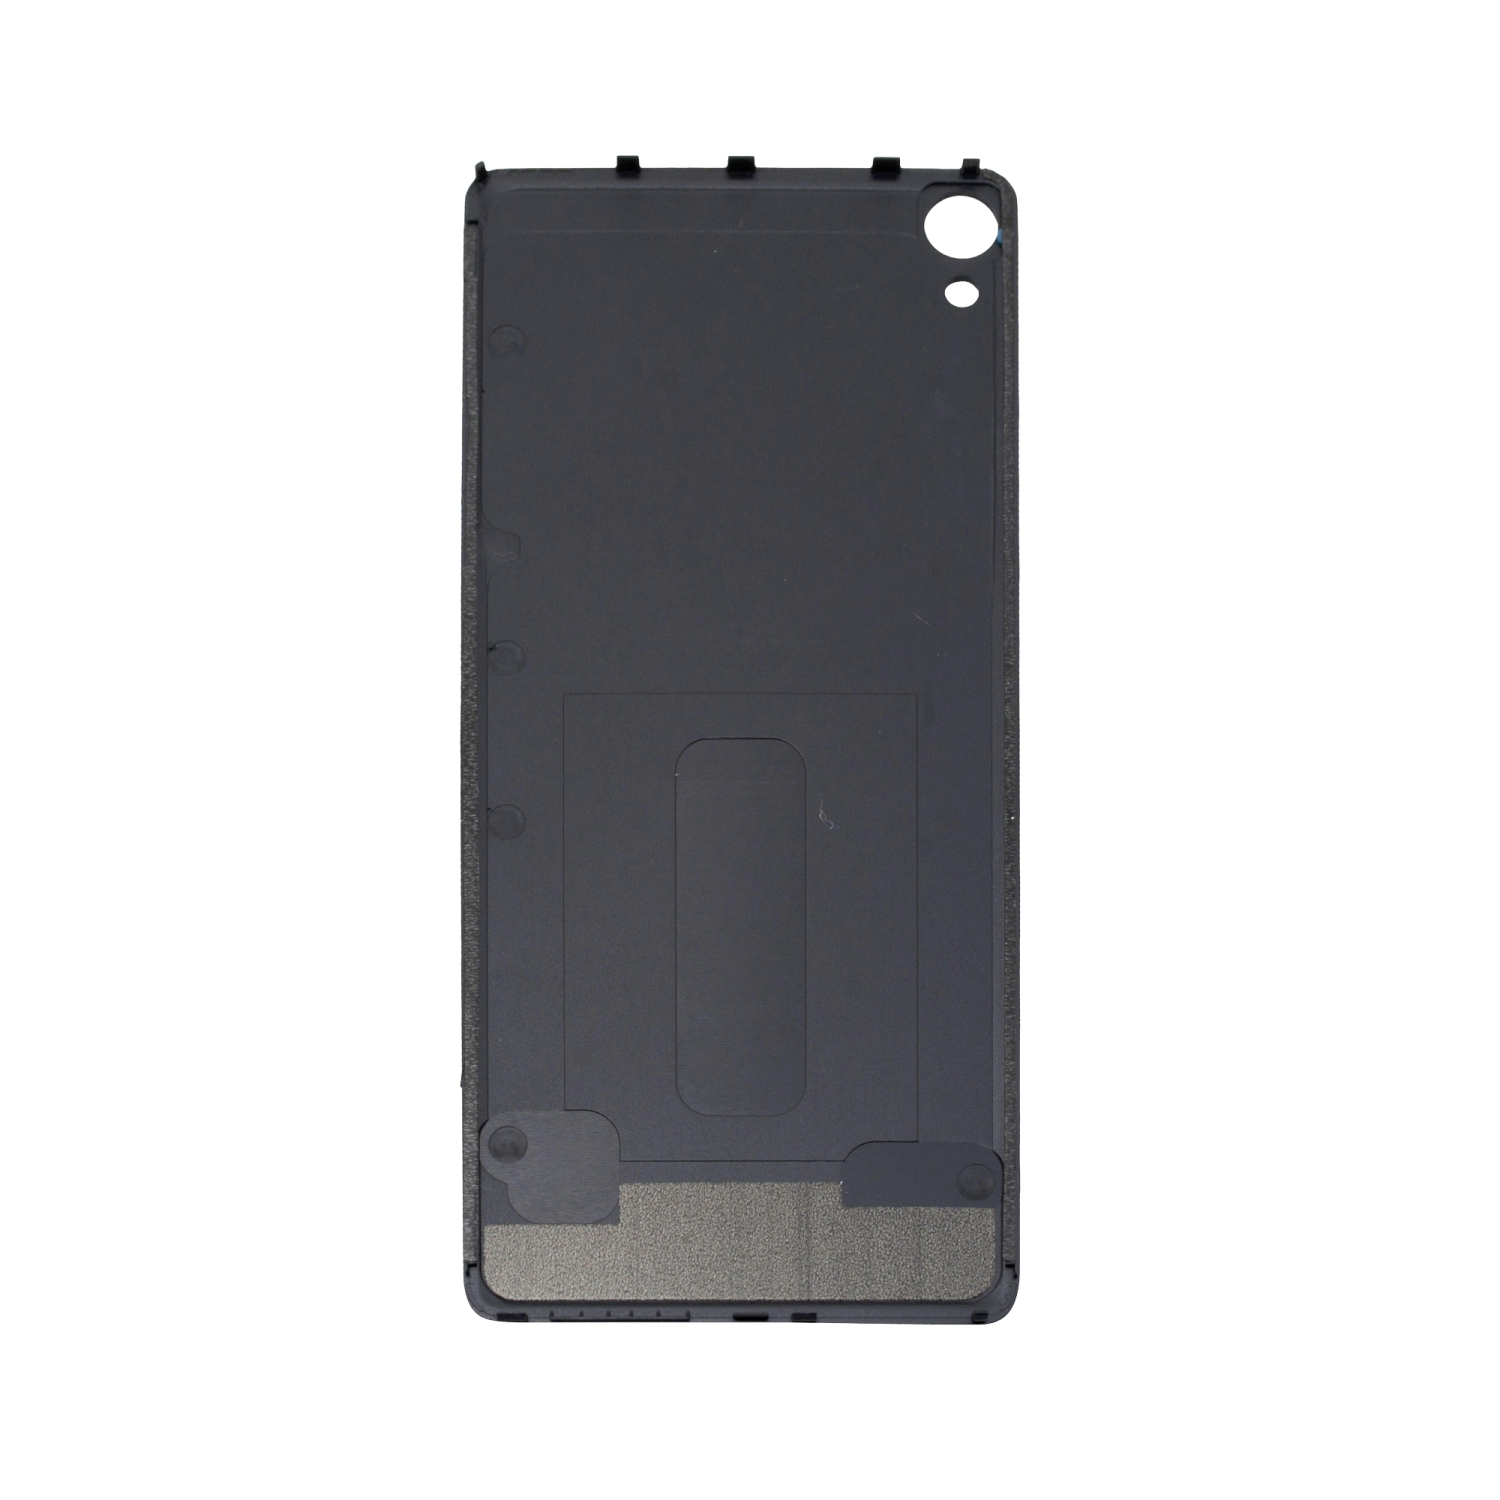 Sony Xperia XA Back Housing Cover Door Rear Case Chassis Replacement Frame - Black